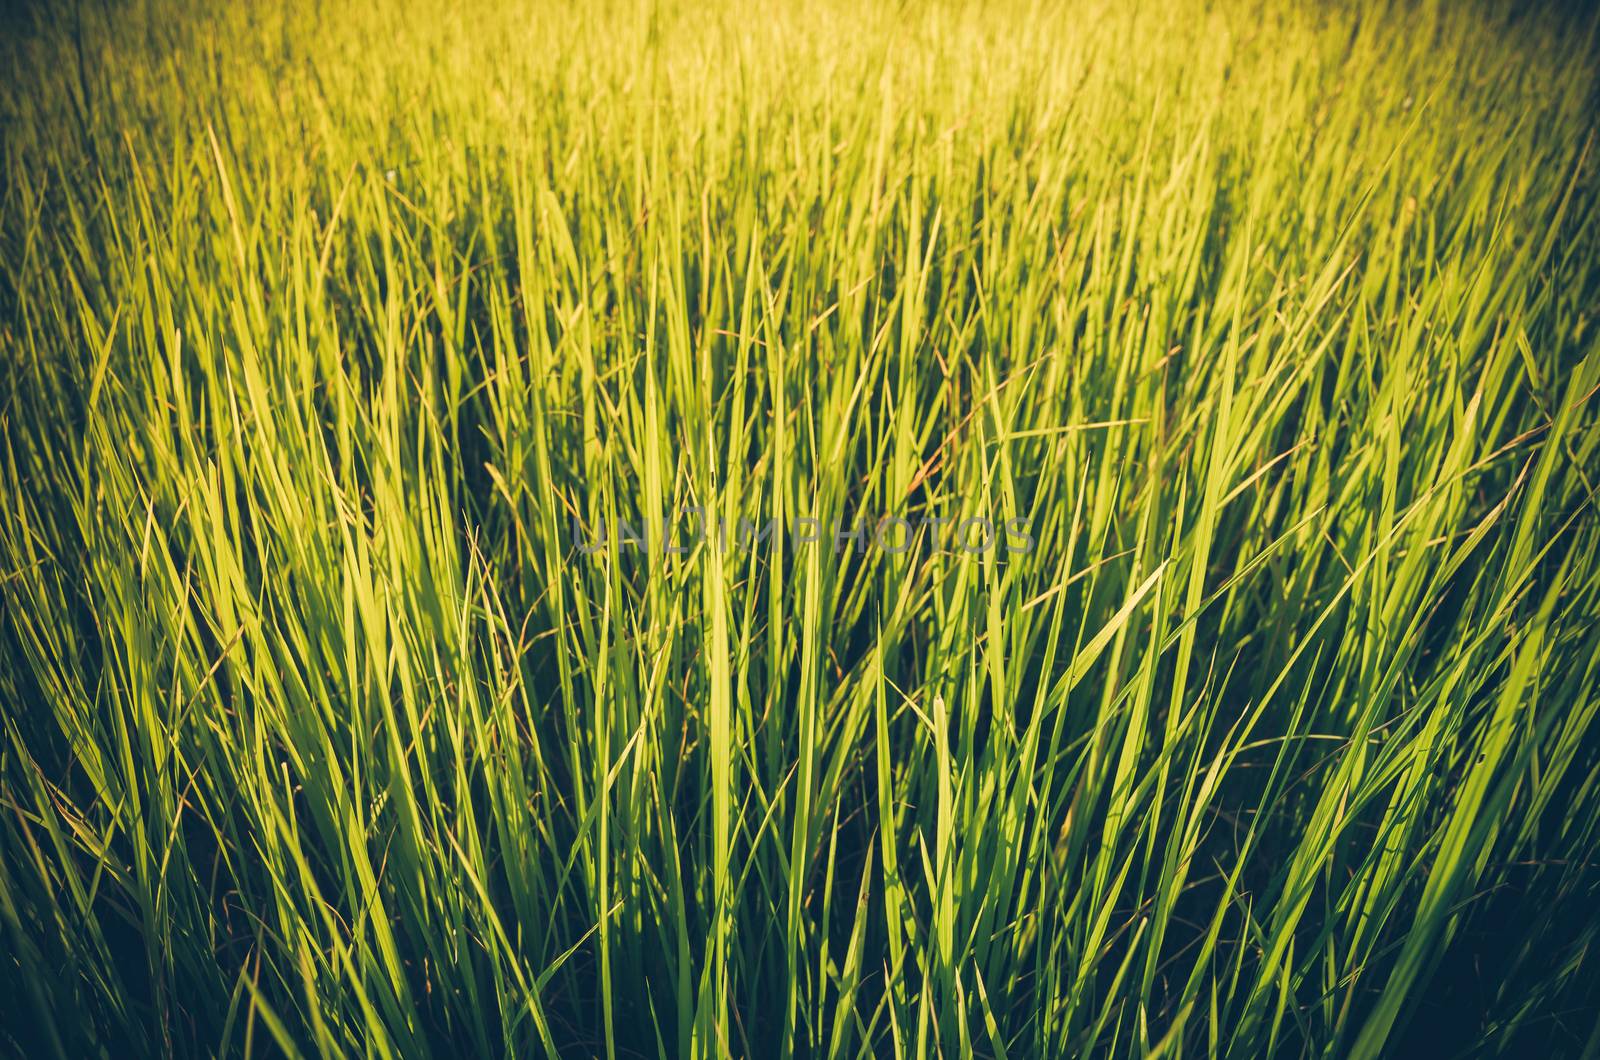 Green grass meadow field in the rice field Thailand background vintage